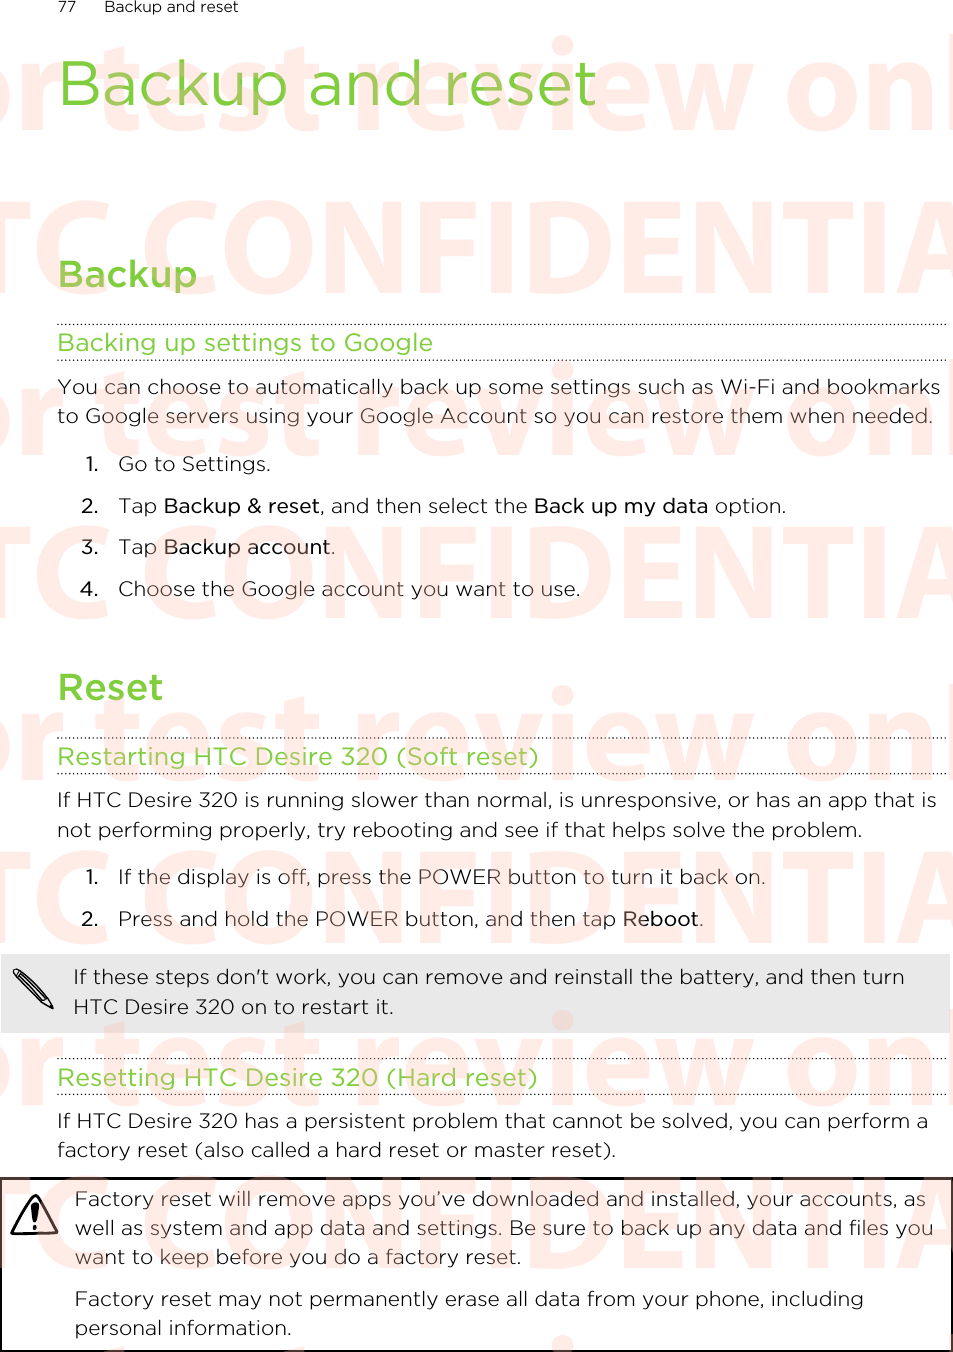 Backup and resetBackupBacking up settings to GoogleYou can choose to automatically back up some settings such as Wi-Fi and bookmarksto Google servers using your Google Account so you can restore them when needed.1. Go to Settings.2. Tap Backup &amp; reset, and then select the Back up my data option.3. Tap Backup account.4. Choose the Google account you want to use.ResetRestarting HTC Desire 320 (Soft reset)If HTC Desire 320 is running slower than normal, is unresponsive, or has an app that isnot performing properly, try rebooting and see if that helps solve the problem.1. If the display is off, press the POWER button to turn it back on.2. Press and hold the POWER button, and then tap Reboot.If these steps don&apos;t work, you can remove and reinstall the battery, and then turnHTC Desire 320 on to restart it.Resetting HTC Desire 320 (Hard reset)If HTC Desire 320 has a persistent problem that cannot be solved, you can perform afactory reset (also called a hard reset or master reset).Factory reset will remove apps you’ve downloaded and installed, your accounts, aswell as system and app data and settings. Be sure to back up any data and files youwant to keep before you do a factory reset.Factory reset may not permanently erase all data from your phone, includingpersonal information.77 Backup and resetHTC CONFIDENTIAL For test review only HTC CONFIDENTIAL For test review only HTC CONFIDENTIAL For test review only HTC CONFIDENTIAL For test review only HTC CONFIDENTIAL For test review only HTC CONFIDENTIAL For test review only